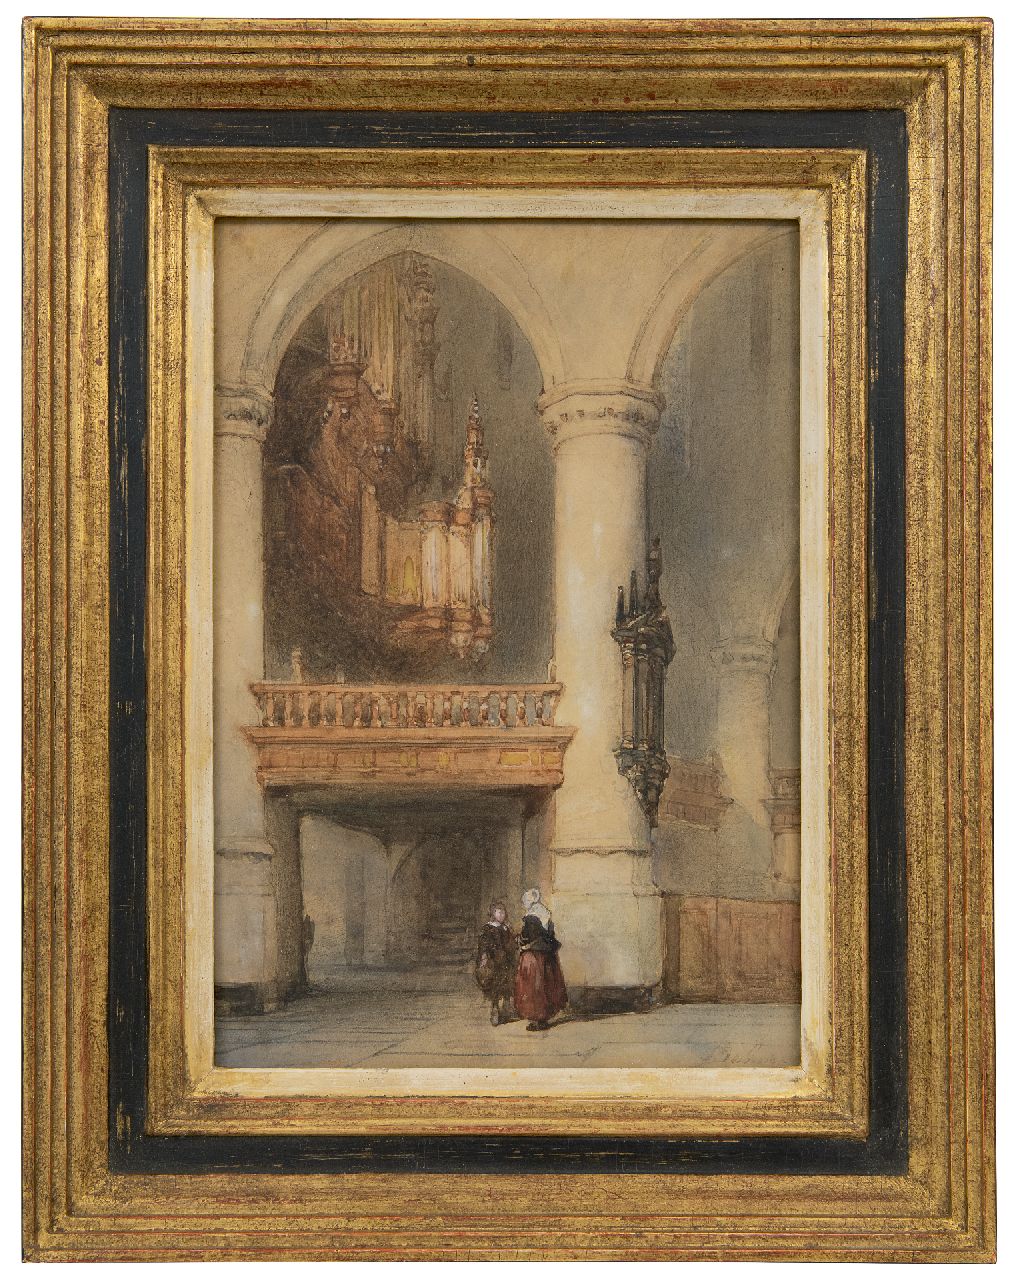 Bosboom J.  | Johannes Bosboom, Interior or the oude Kerk in Delft, chalk and watercolour on paper 28.2 x 19.5 cm, signed l.r. and executed ca. 1855